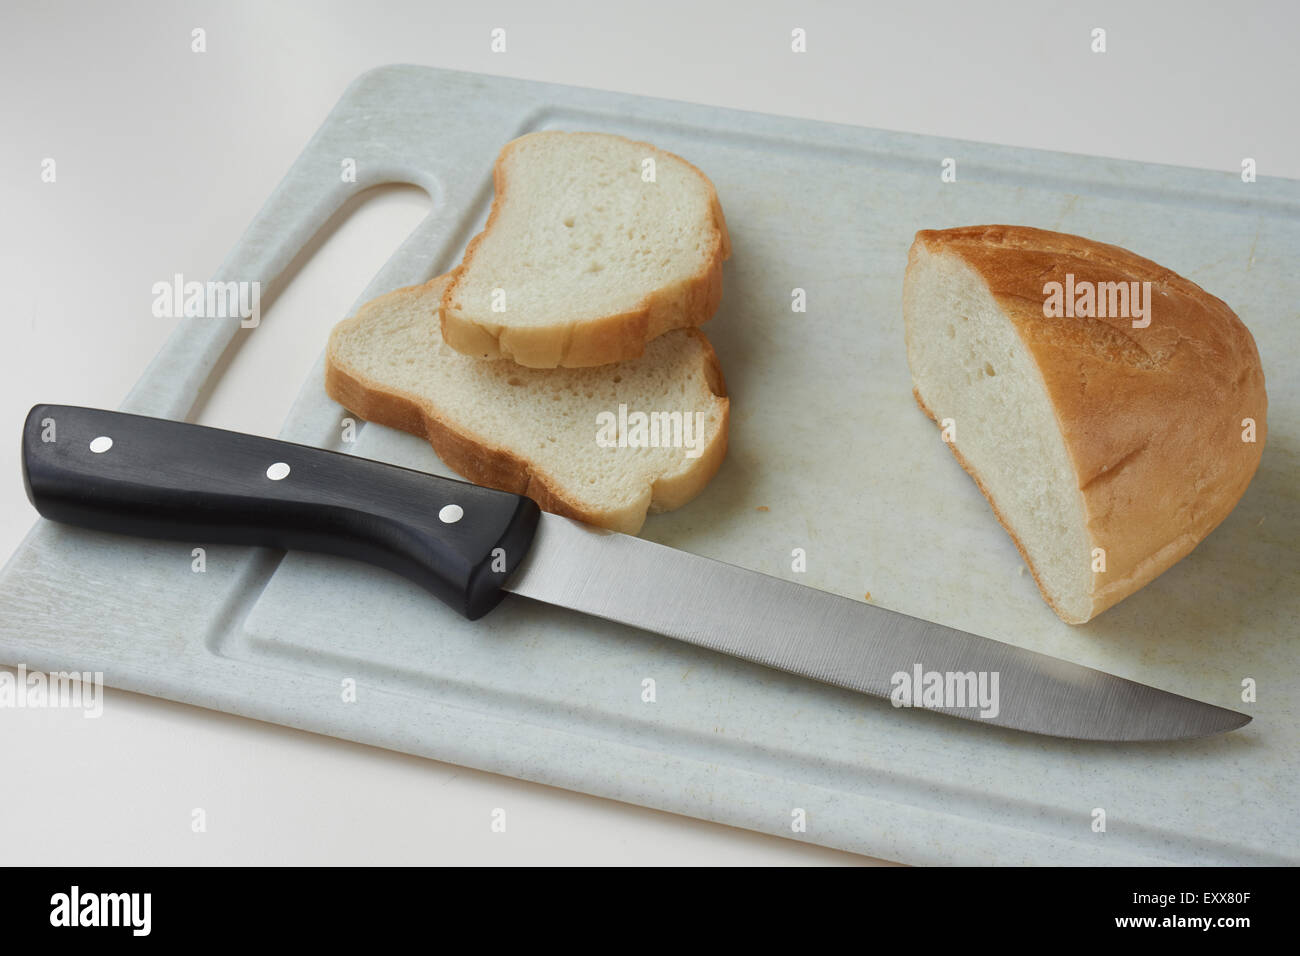 Still life with one knife, bread and two cut slices of bread on plastic cutting board Stock Photo